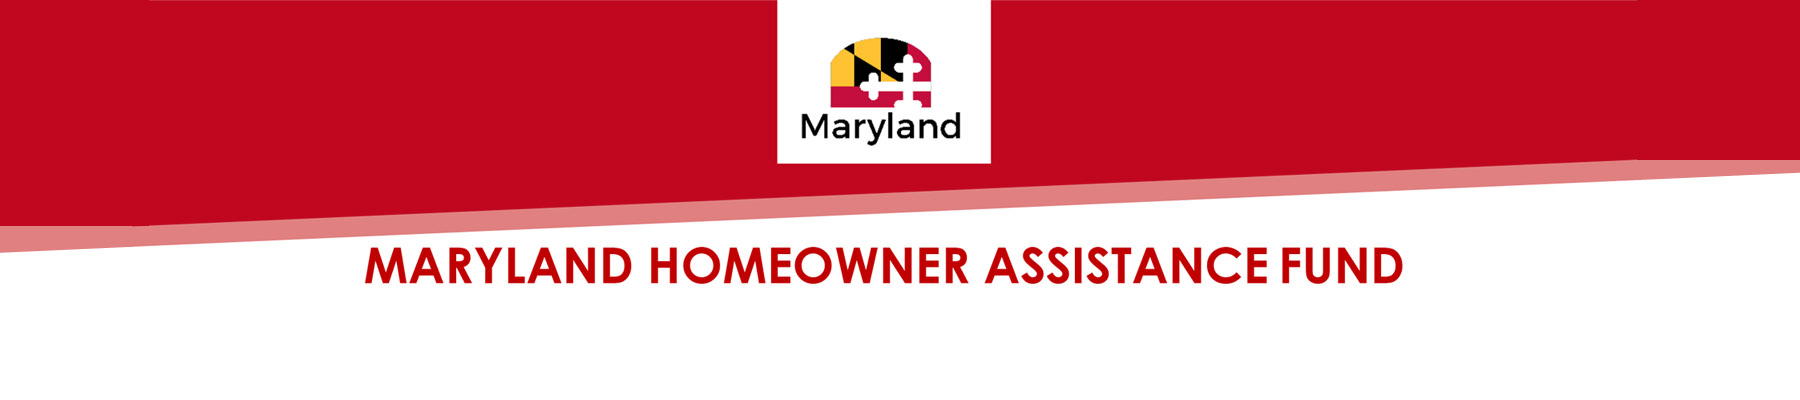 NEW- Maryland Homeowner Assistance Fund